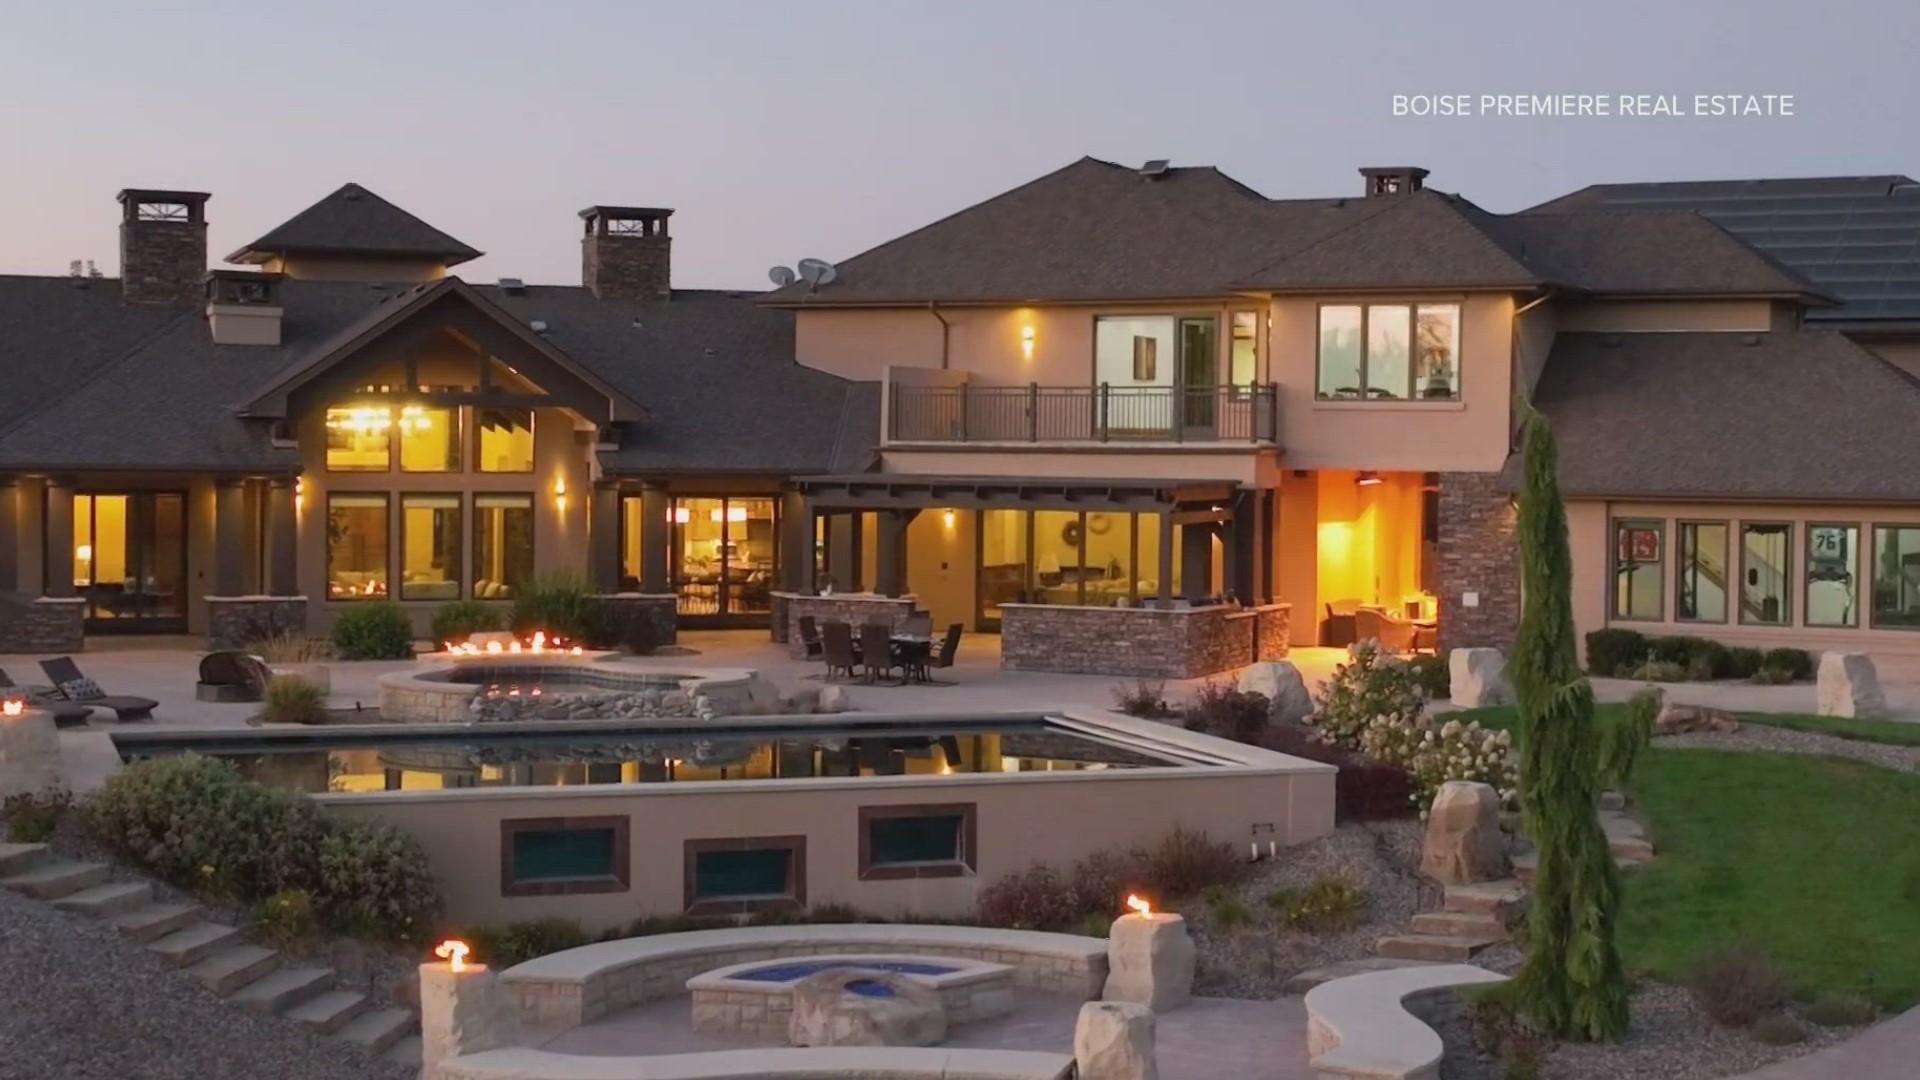 An 8,500 square-foot home in Star recently sold for just under $7 million, setting a new record for the most expensive home purchase in the Treasure Valley.